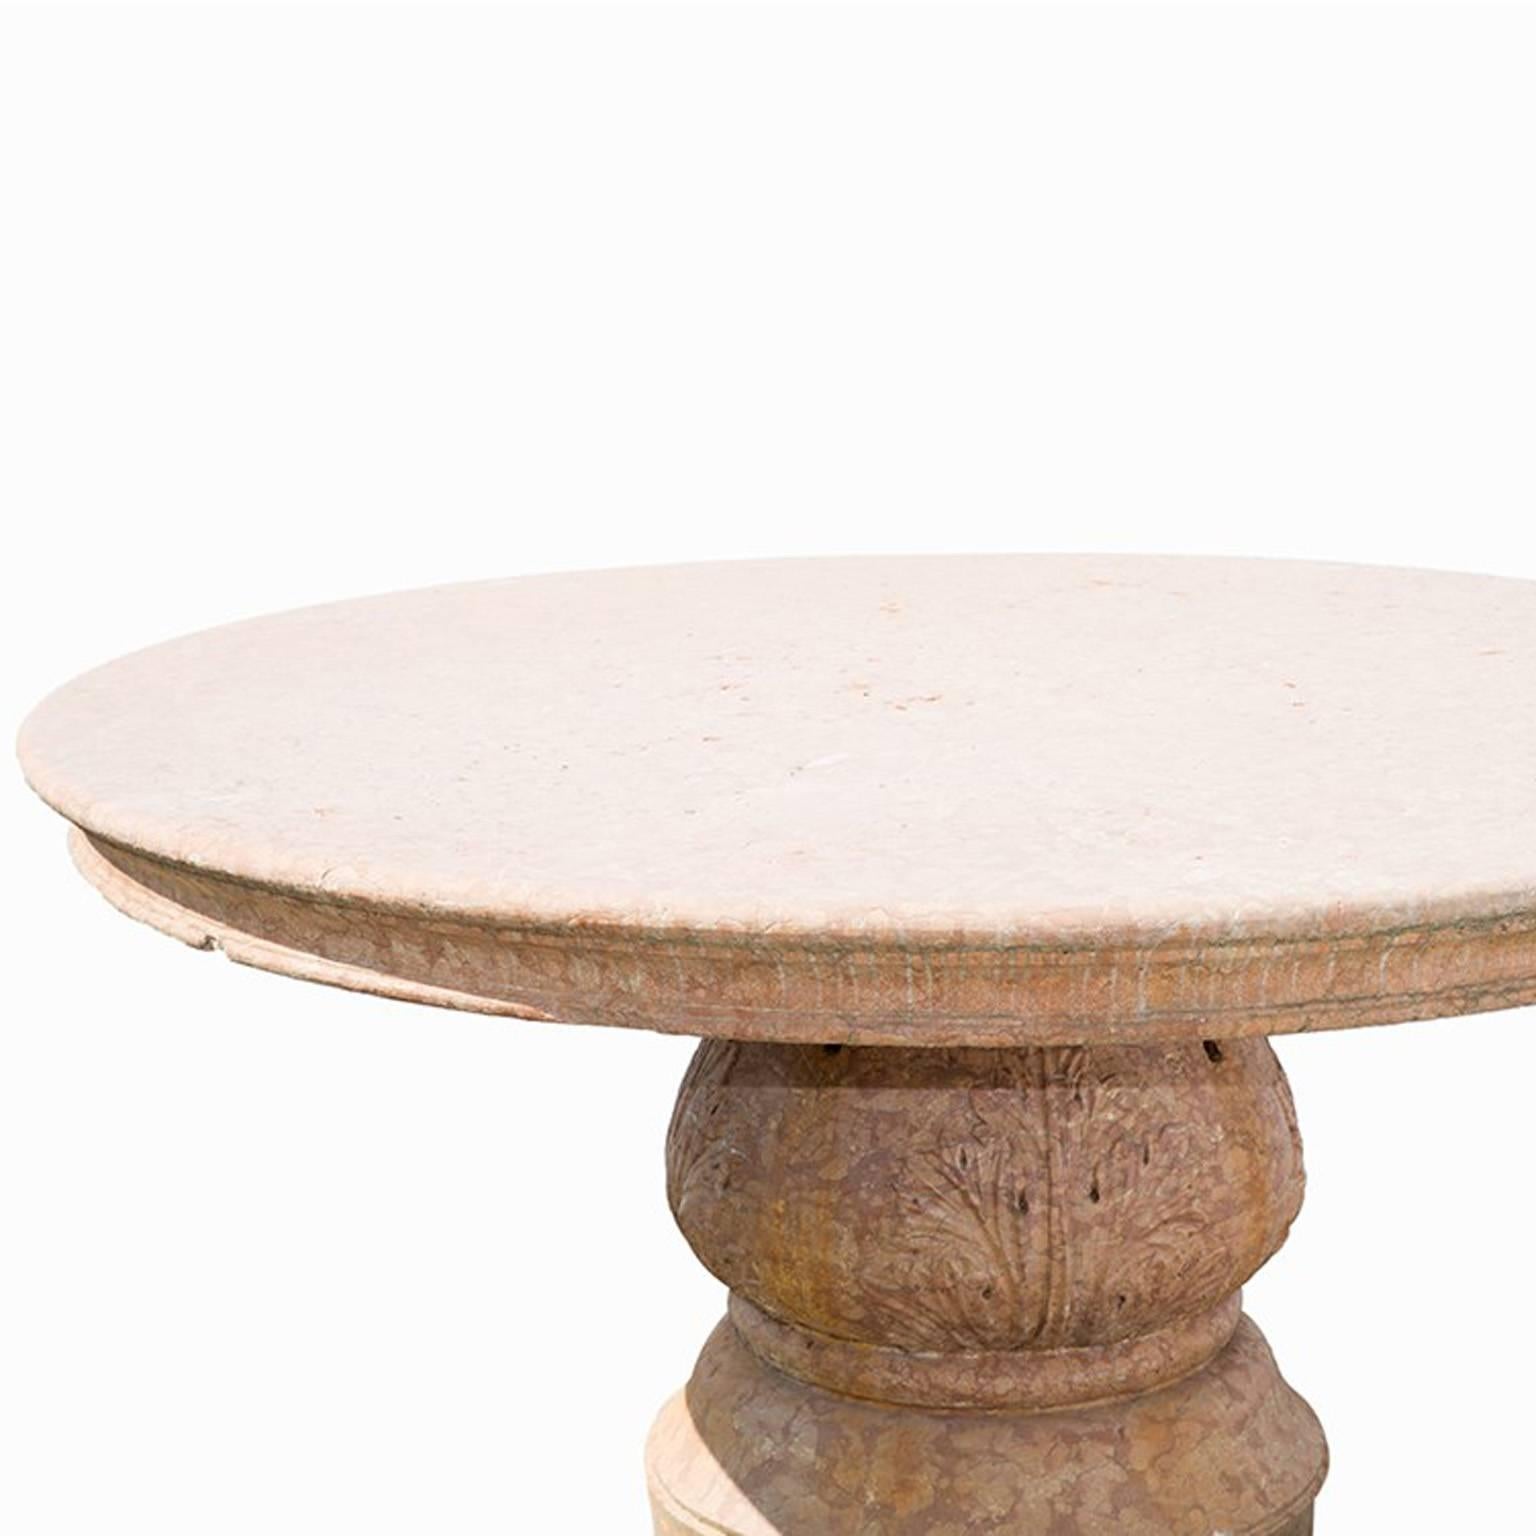 Heavy circular hand-carved Rosso Verona marble table with a baluster shaped base and delicate acanthus leaf carving and the heavy round marble-top,
Italy.